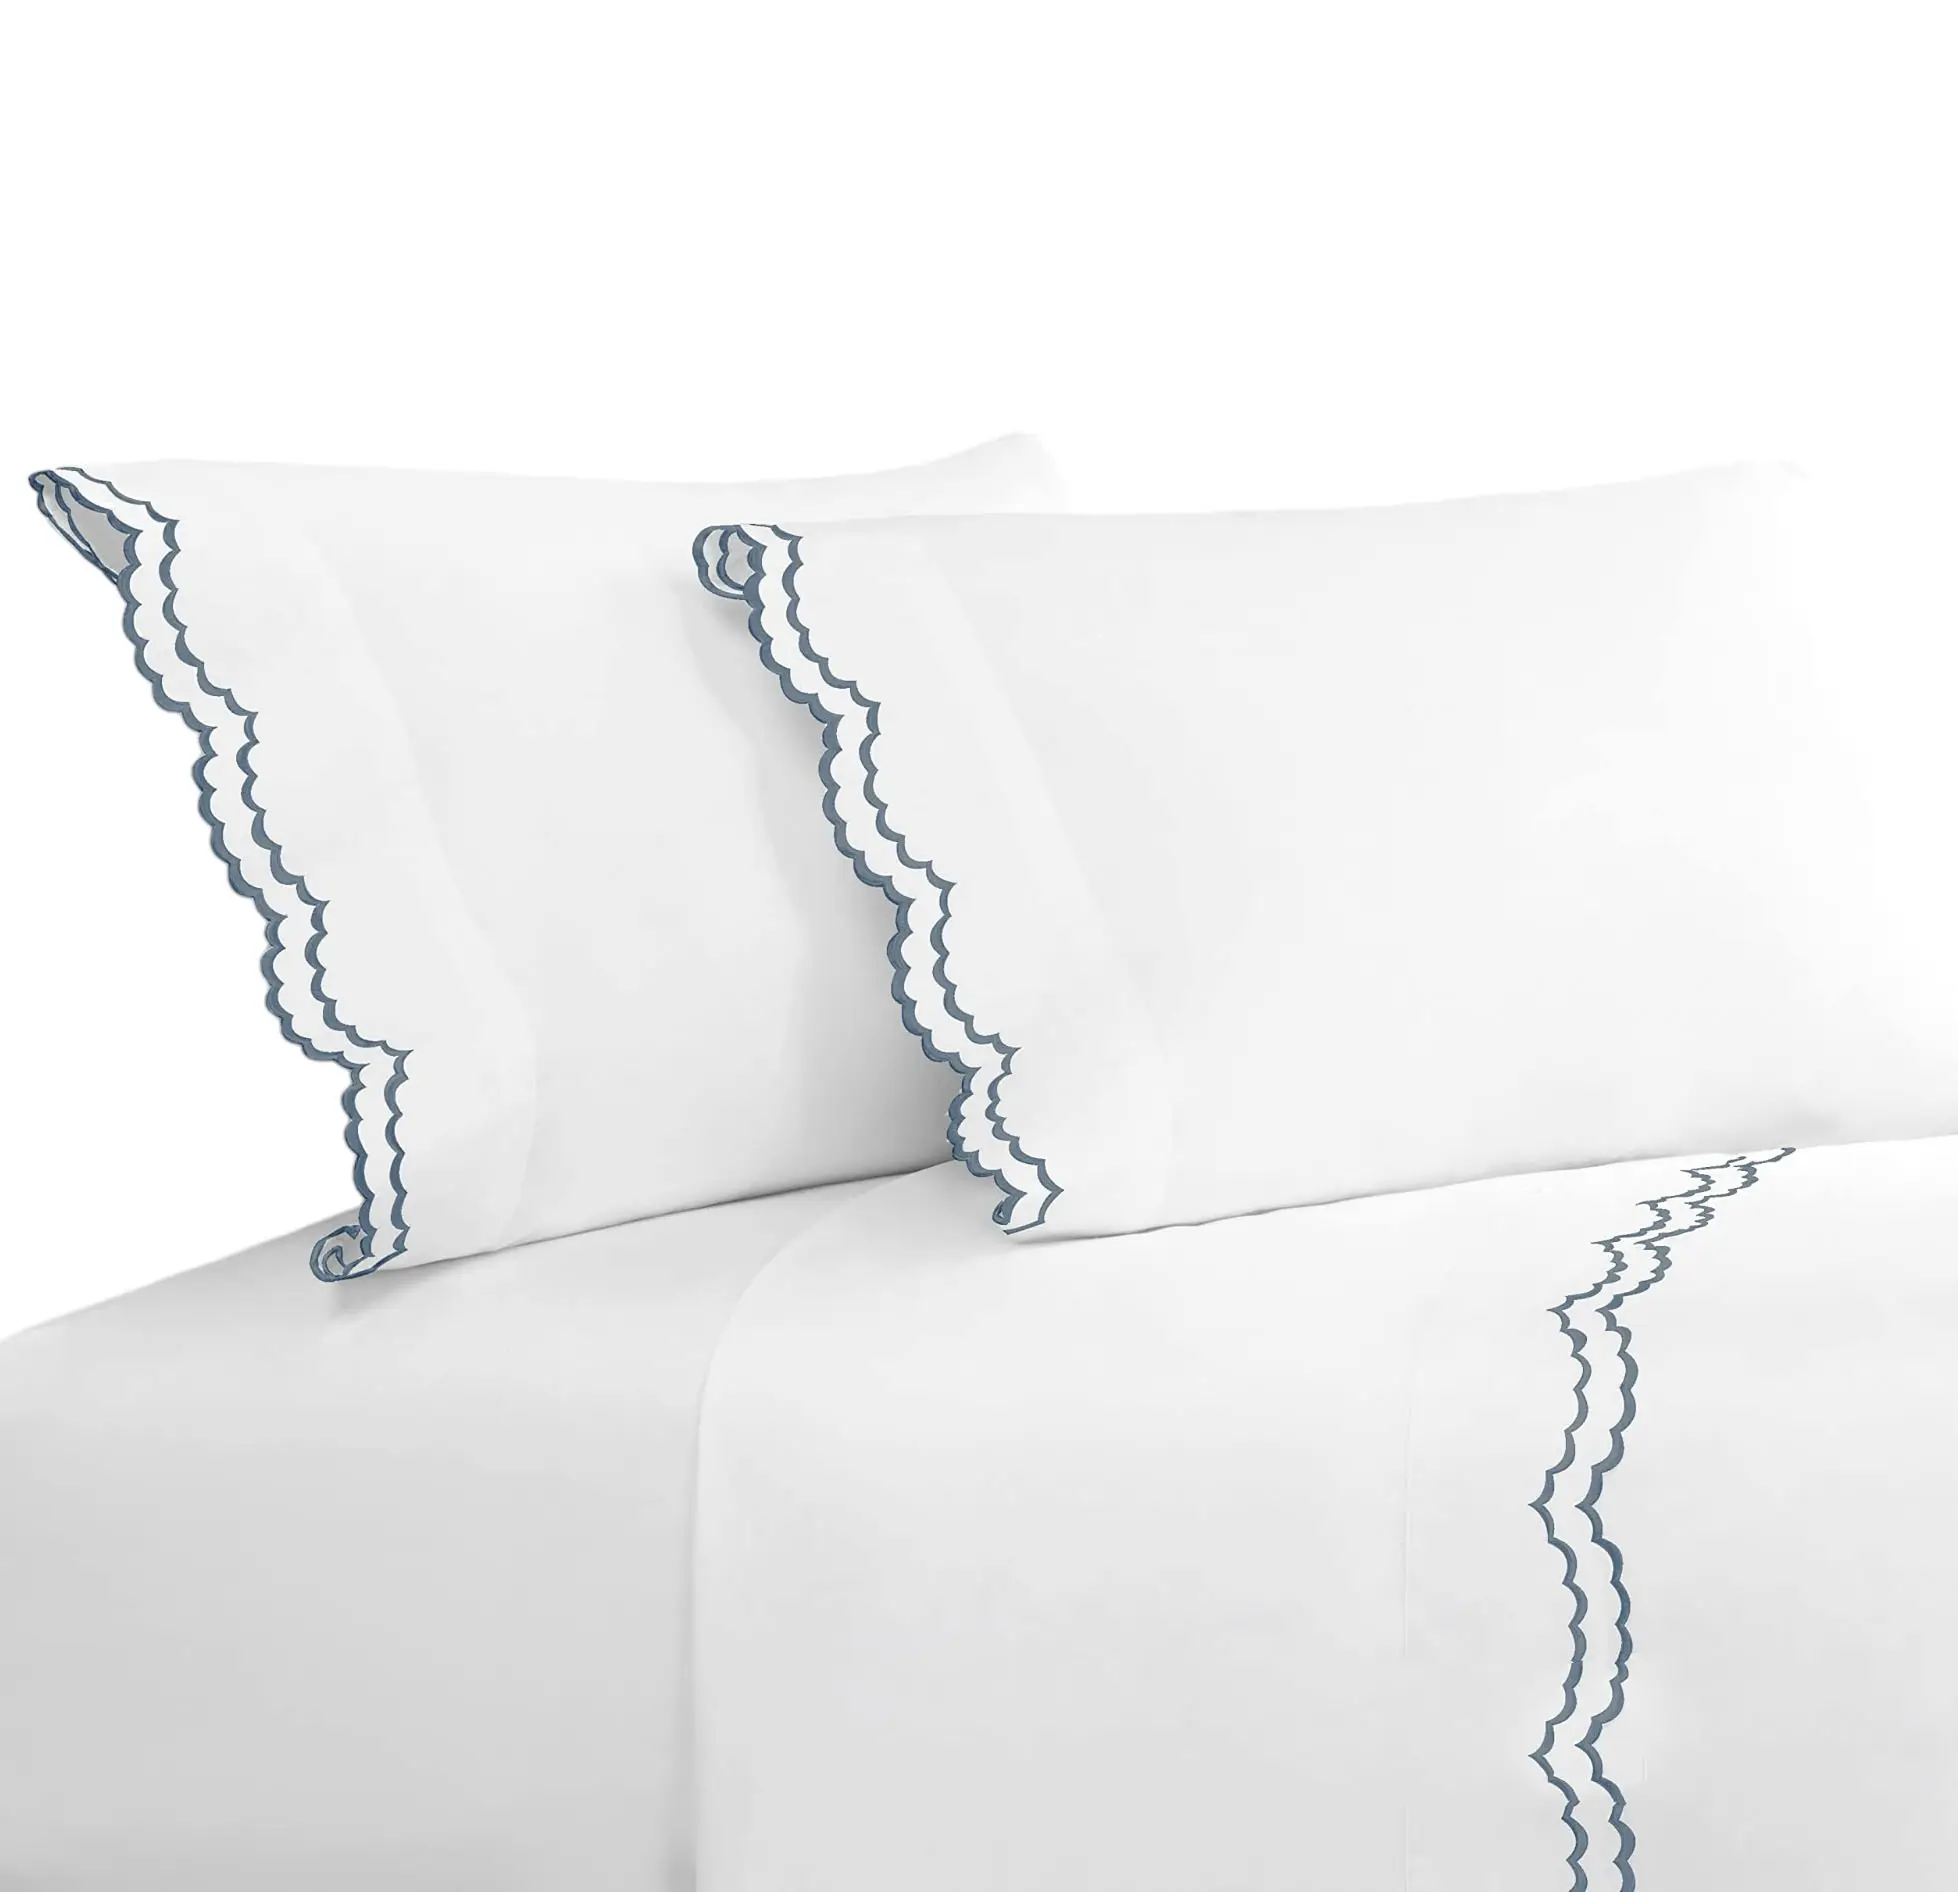 Custom Embroidery Double Scalloped Percale Duvet Cover Sets Luxury Bedding Sets High Quality White Cotton Bed Sheets for Home